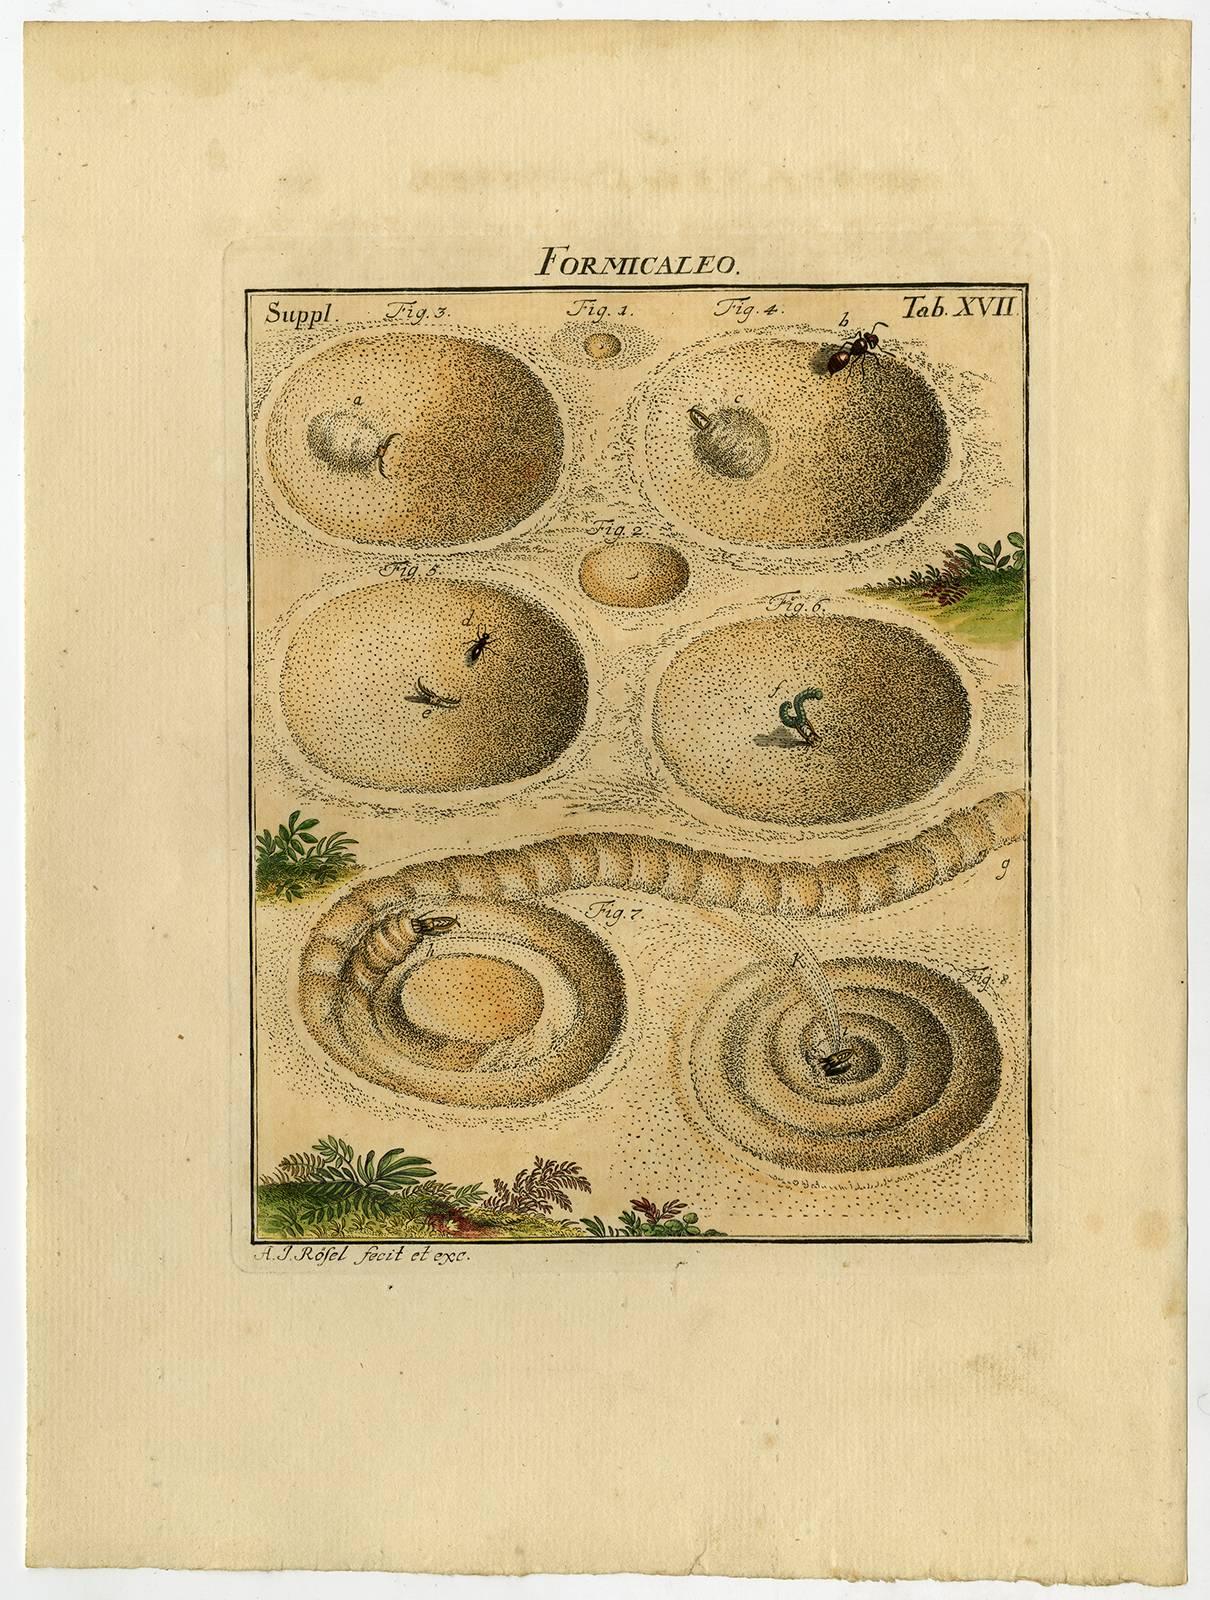 Handcoloured engraving on hand laid (verge) paper. 
Watermark: C & I Honig.

Set of four prints on the Antlion: ''De listige Mieren-Roover, die in eene Land-Nimph verandert'' (The cunning Ant-Lion, that changes into a Land-Nymph). The first plate